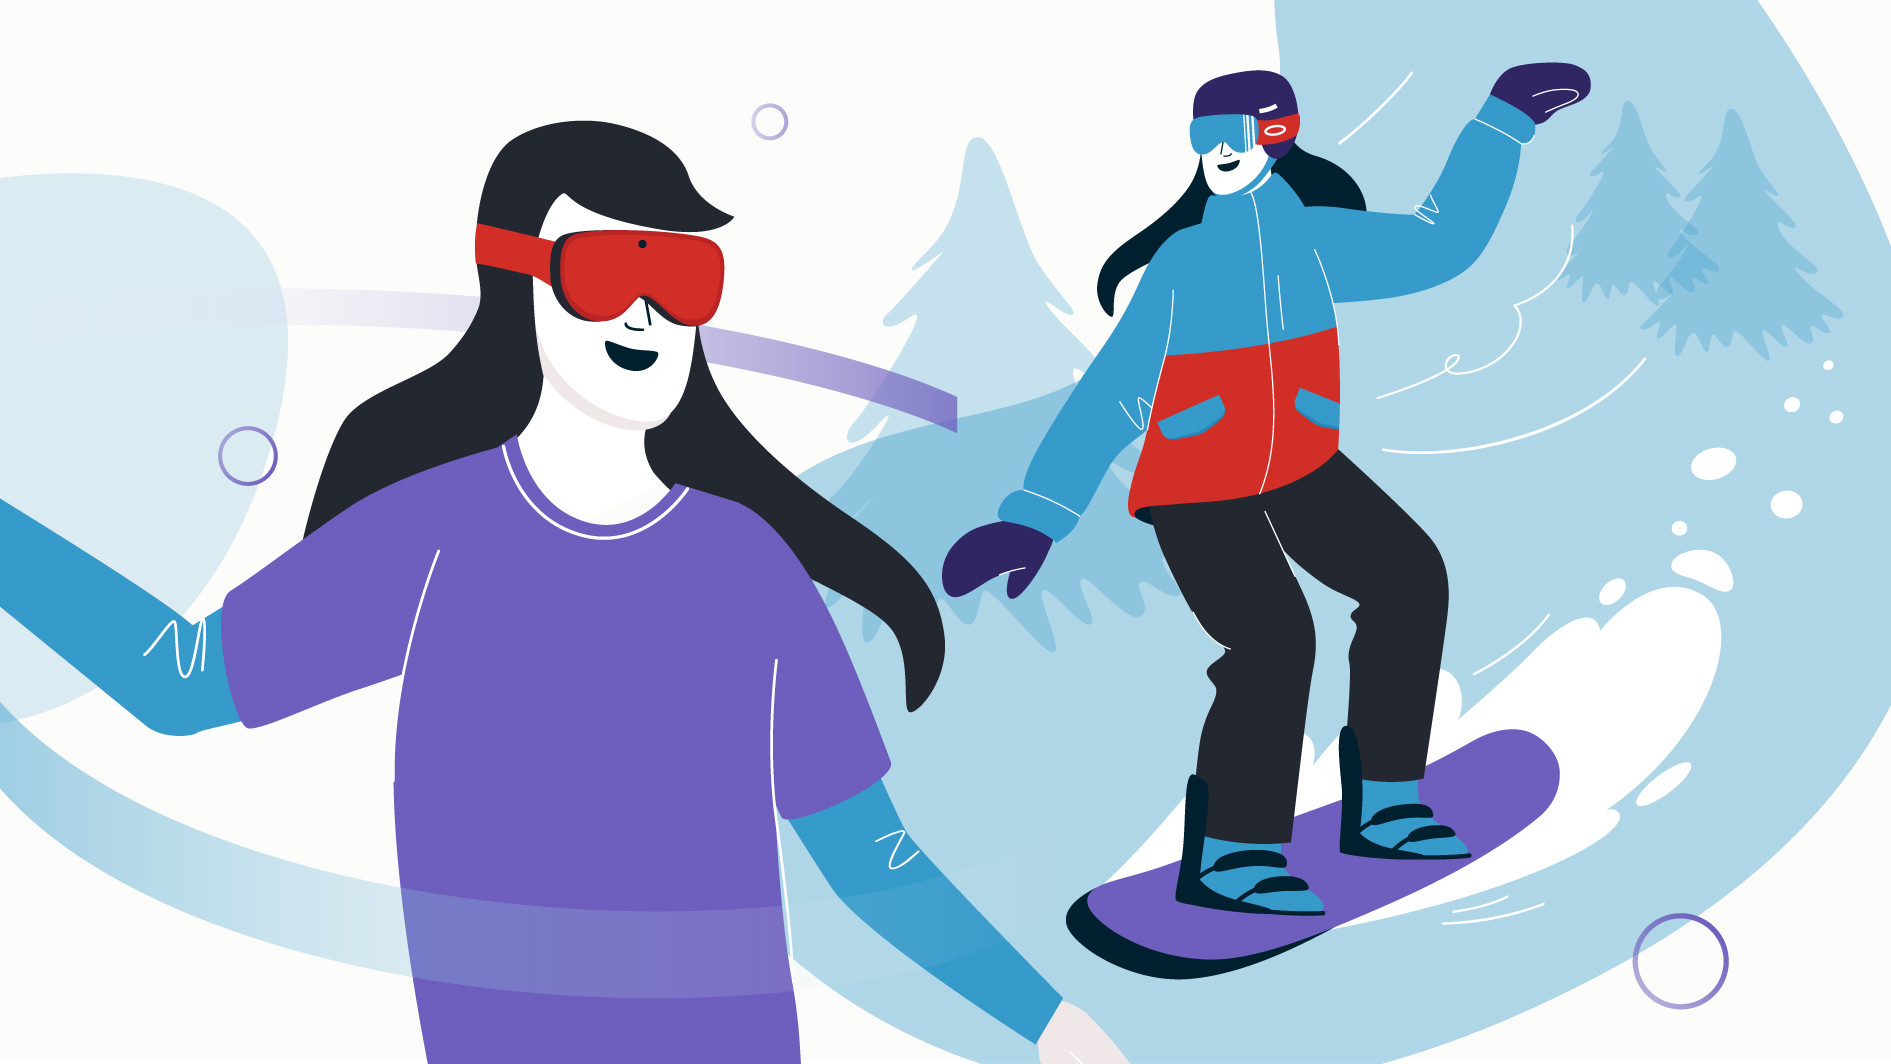  Comparison between an athlete snowboarding and a person using a virtual reality (VR) headset